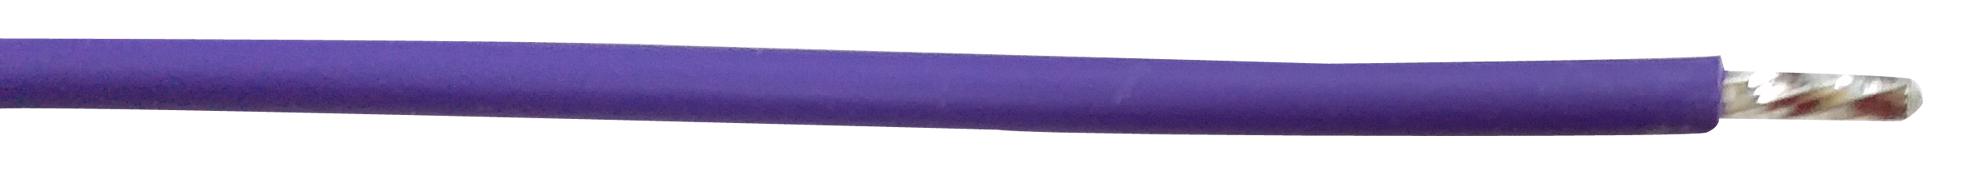 PP002383 HOOK-UP WIRE, 20AWG, PURPLE, 305M, 300V PRO POWER